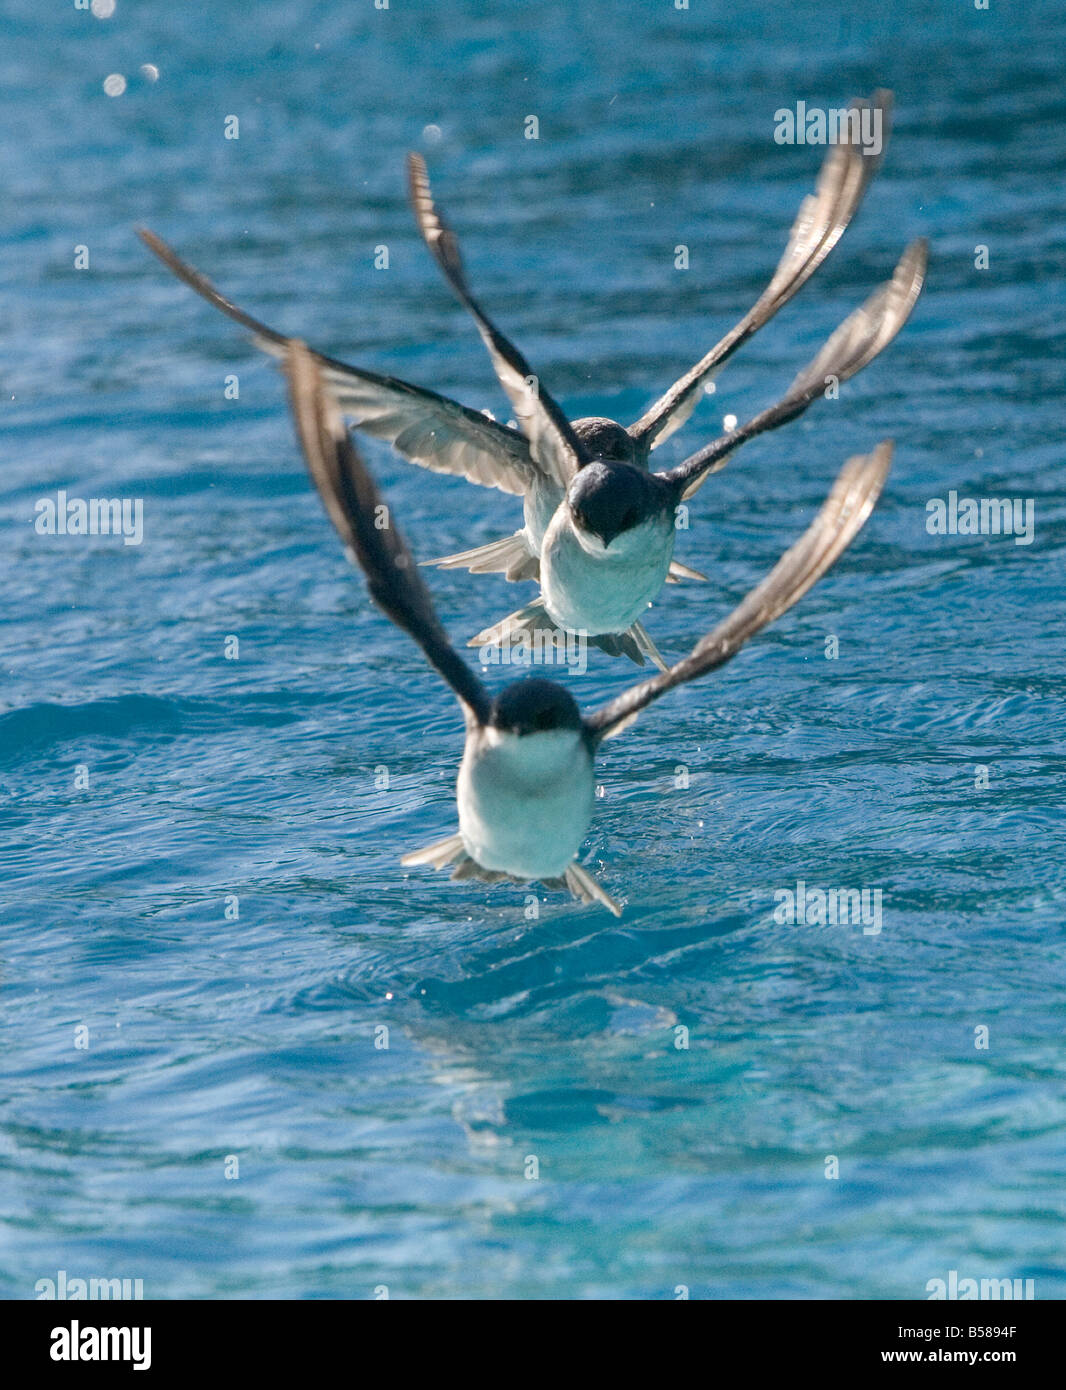 A migrating flock of swallows flies across the surface of a pool and takes a drink of water Stock Photo